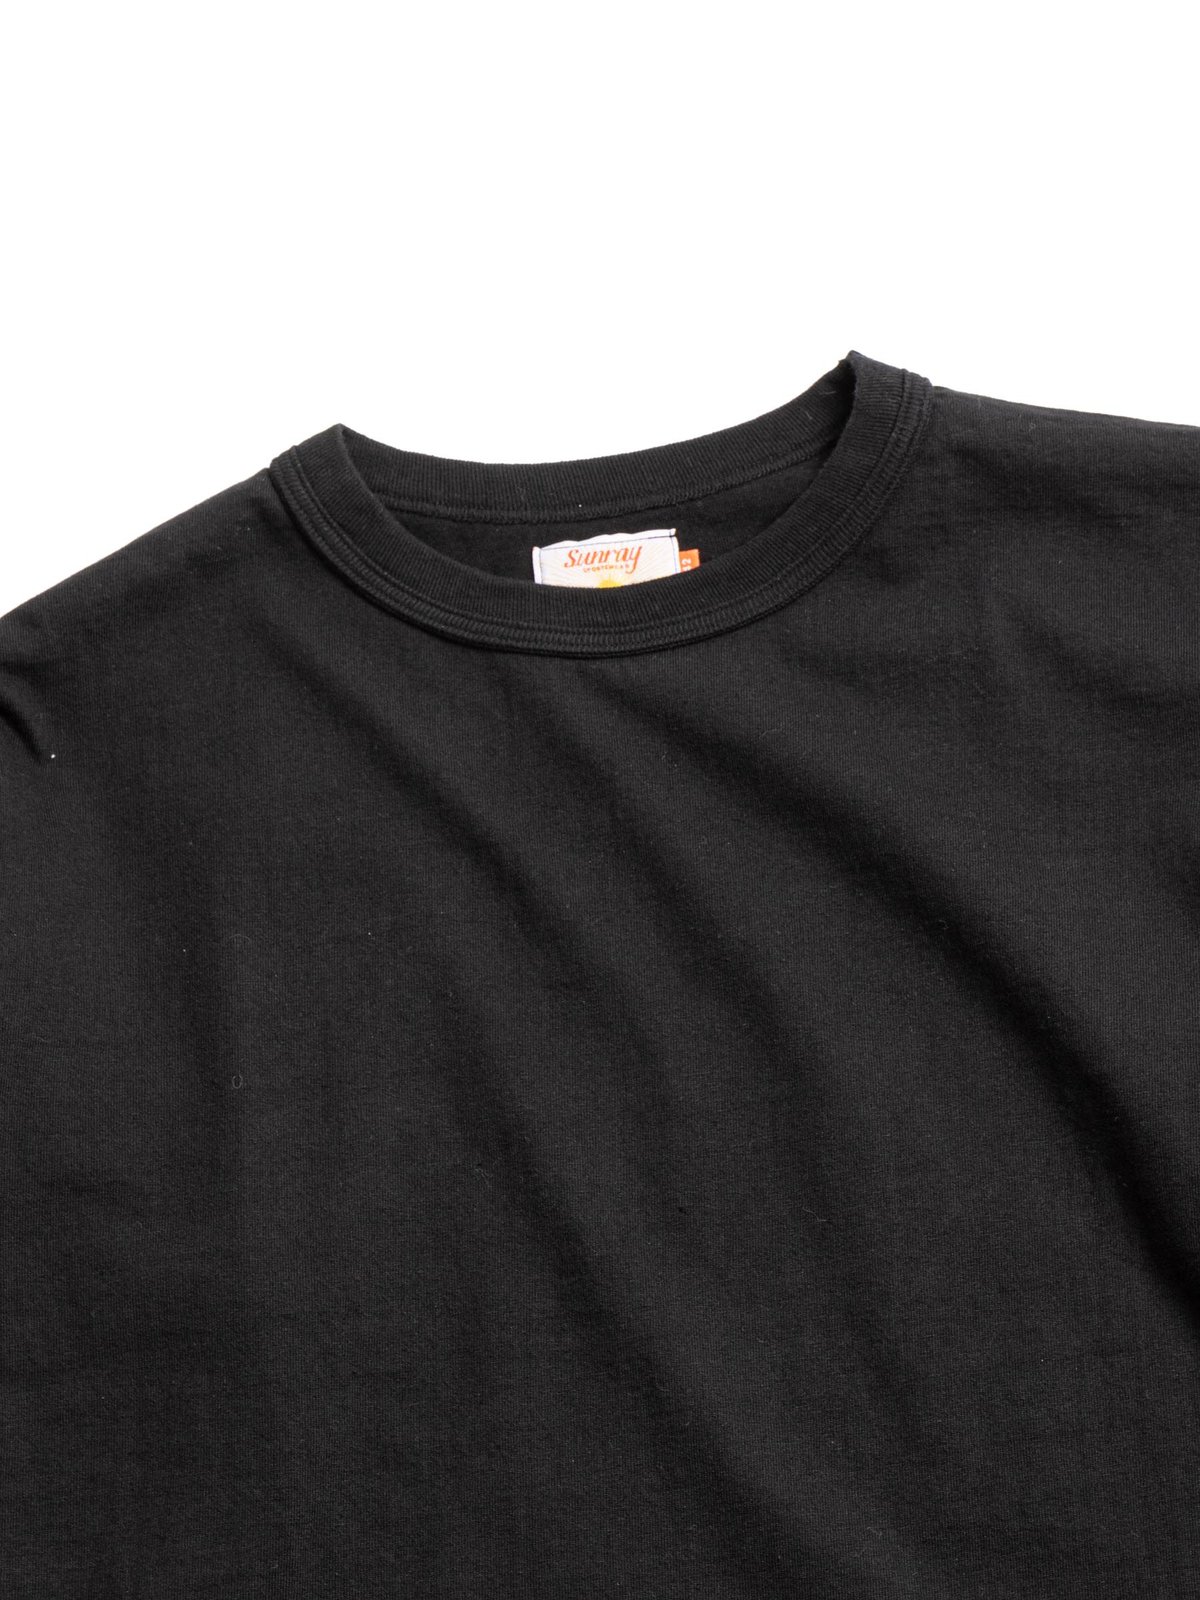 MAKAHA L/S T SHIRT ANTHRACITE - Image 2